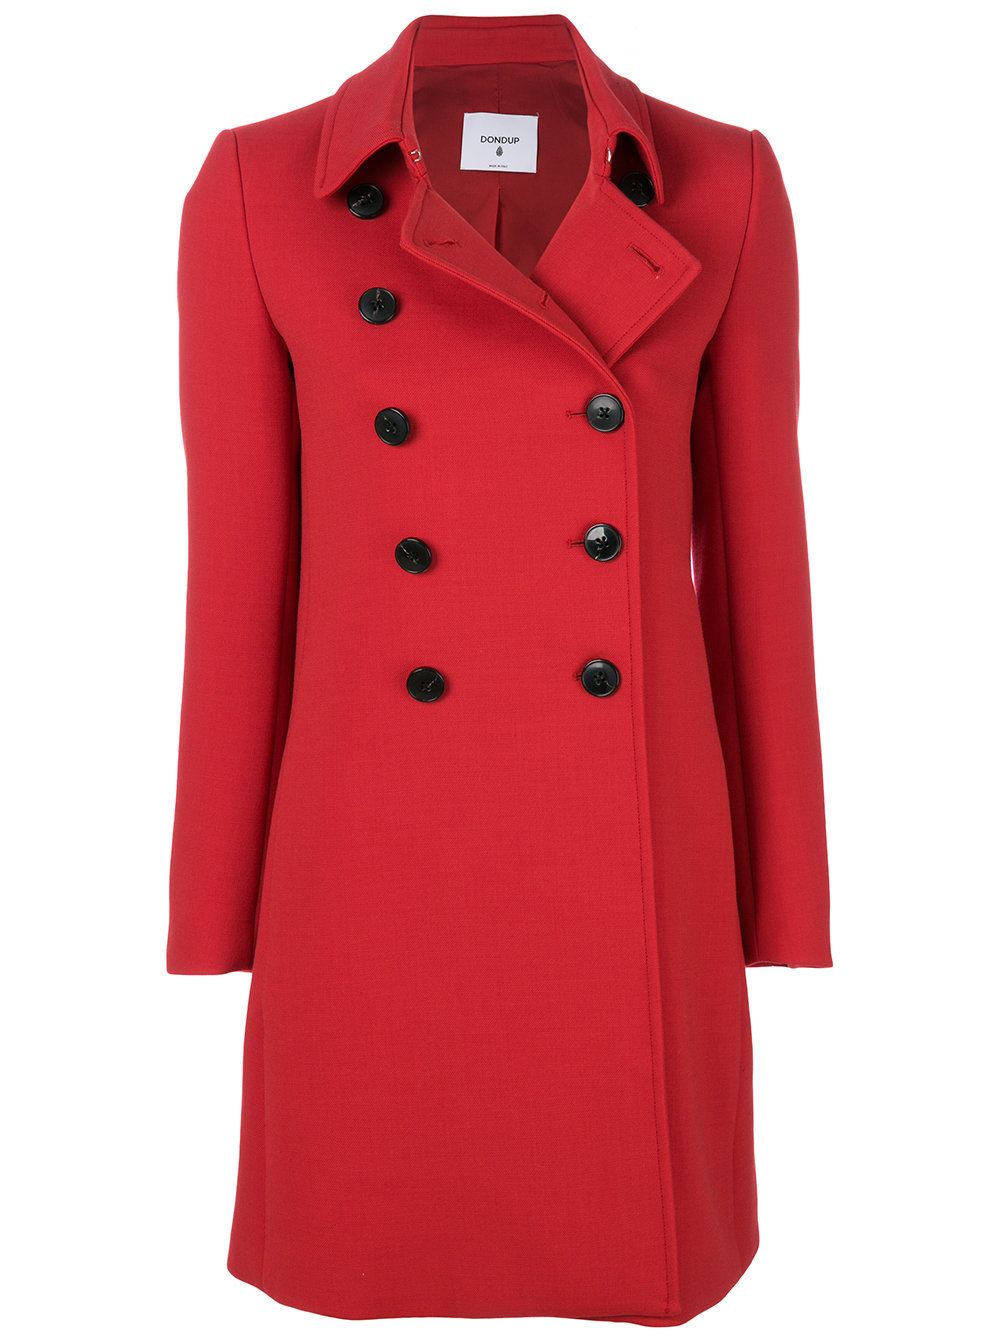 Copy Carrie Underwood’s Killer Red Coat Now | FASHION